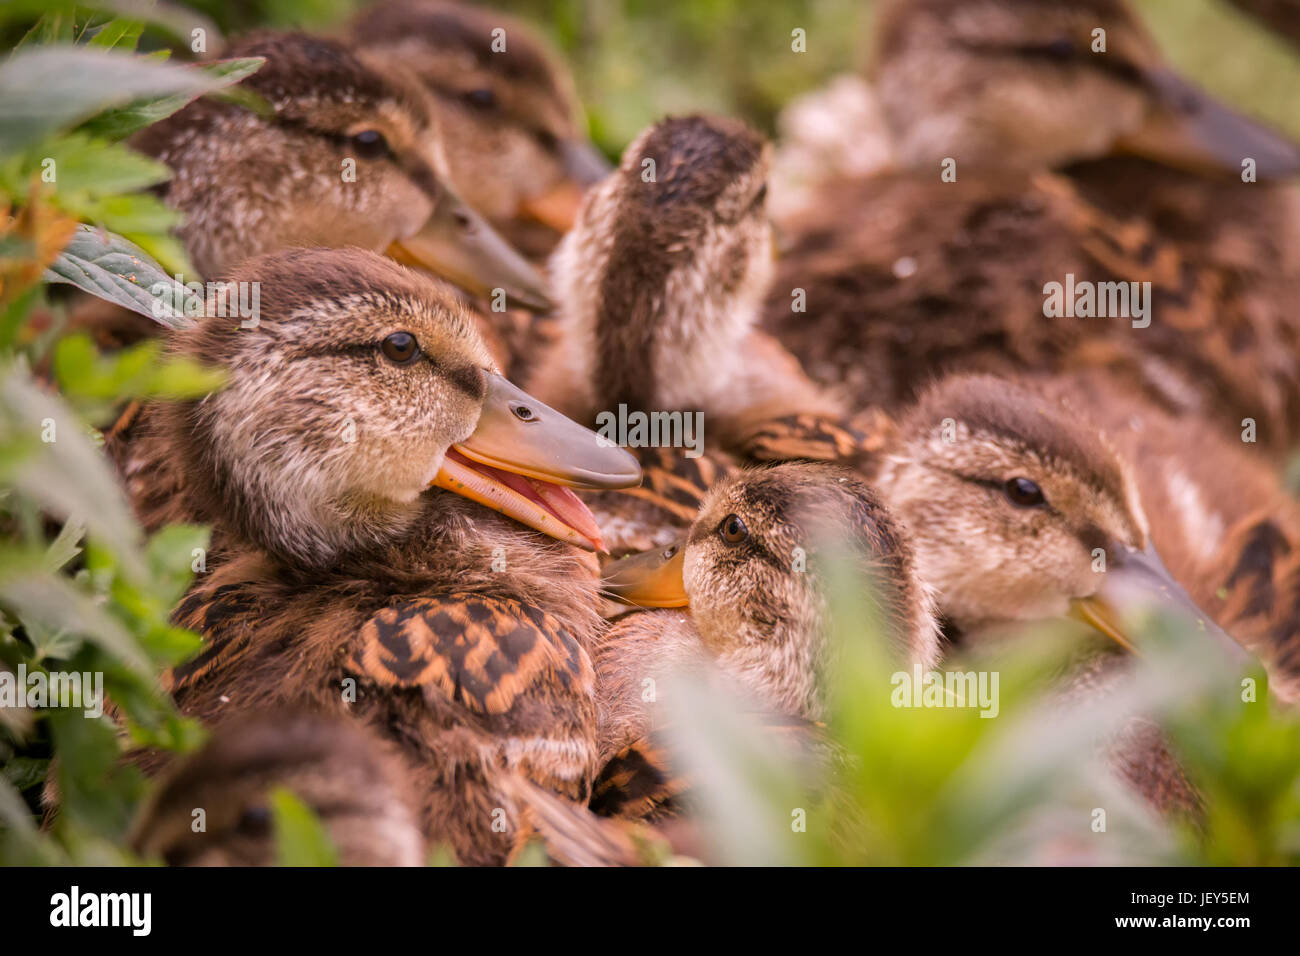 Several Ducklings Huddled Together Stock Photo